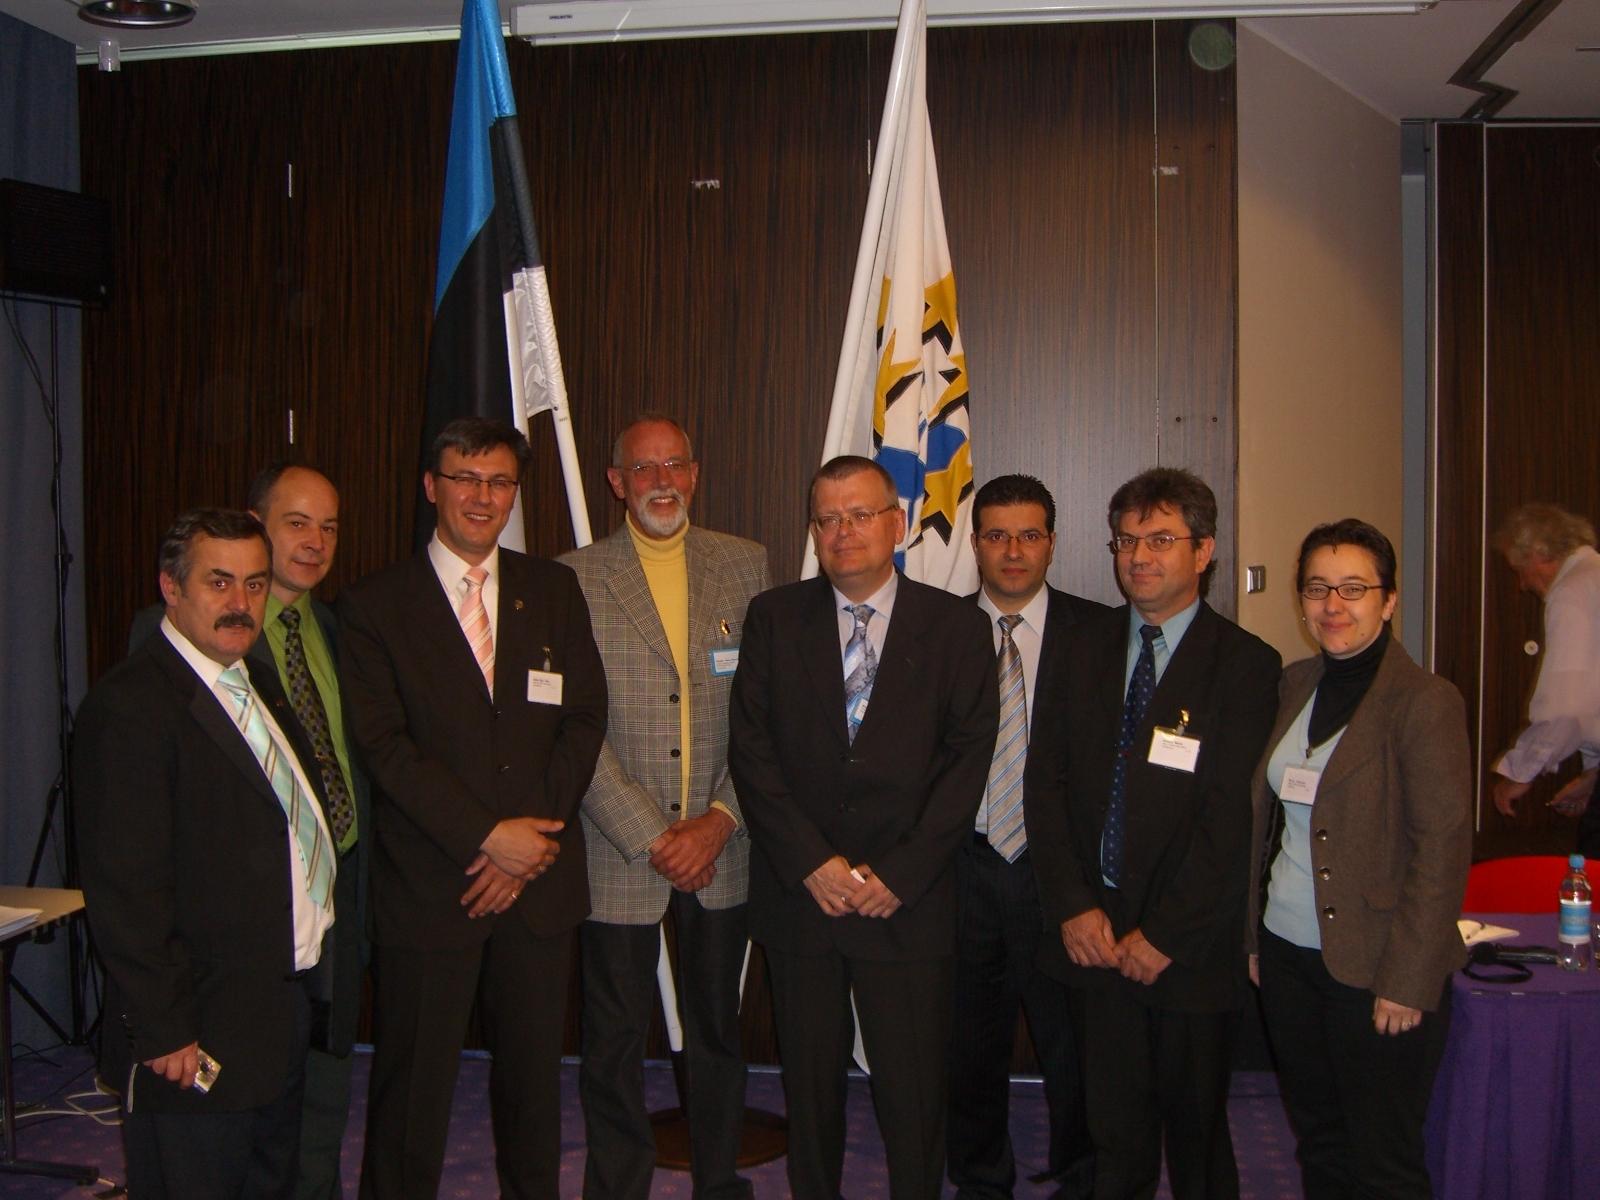 Federation of Western Thrace Turks in Europe (ABTTF) has been accepted to ordinary mem-bership for FUEN.